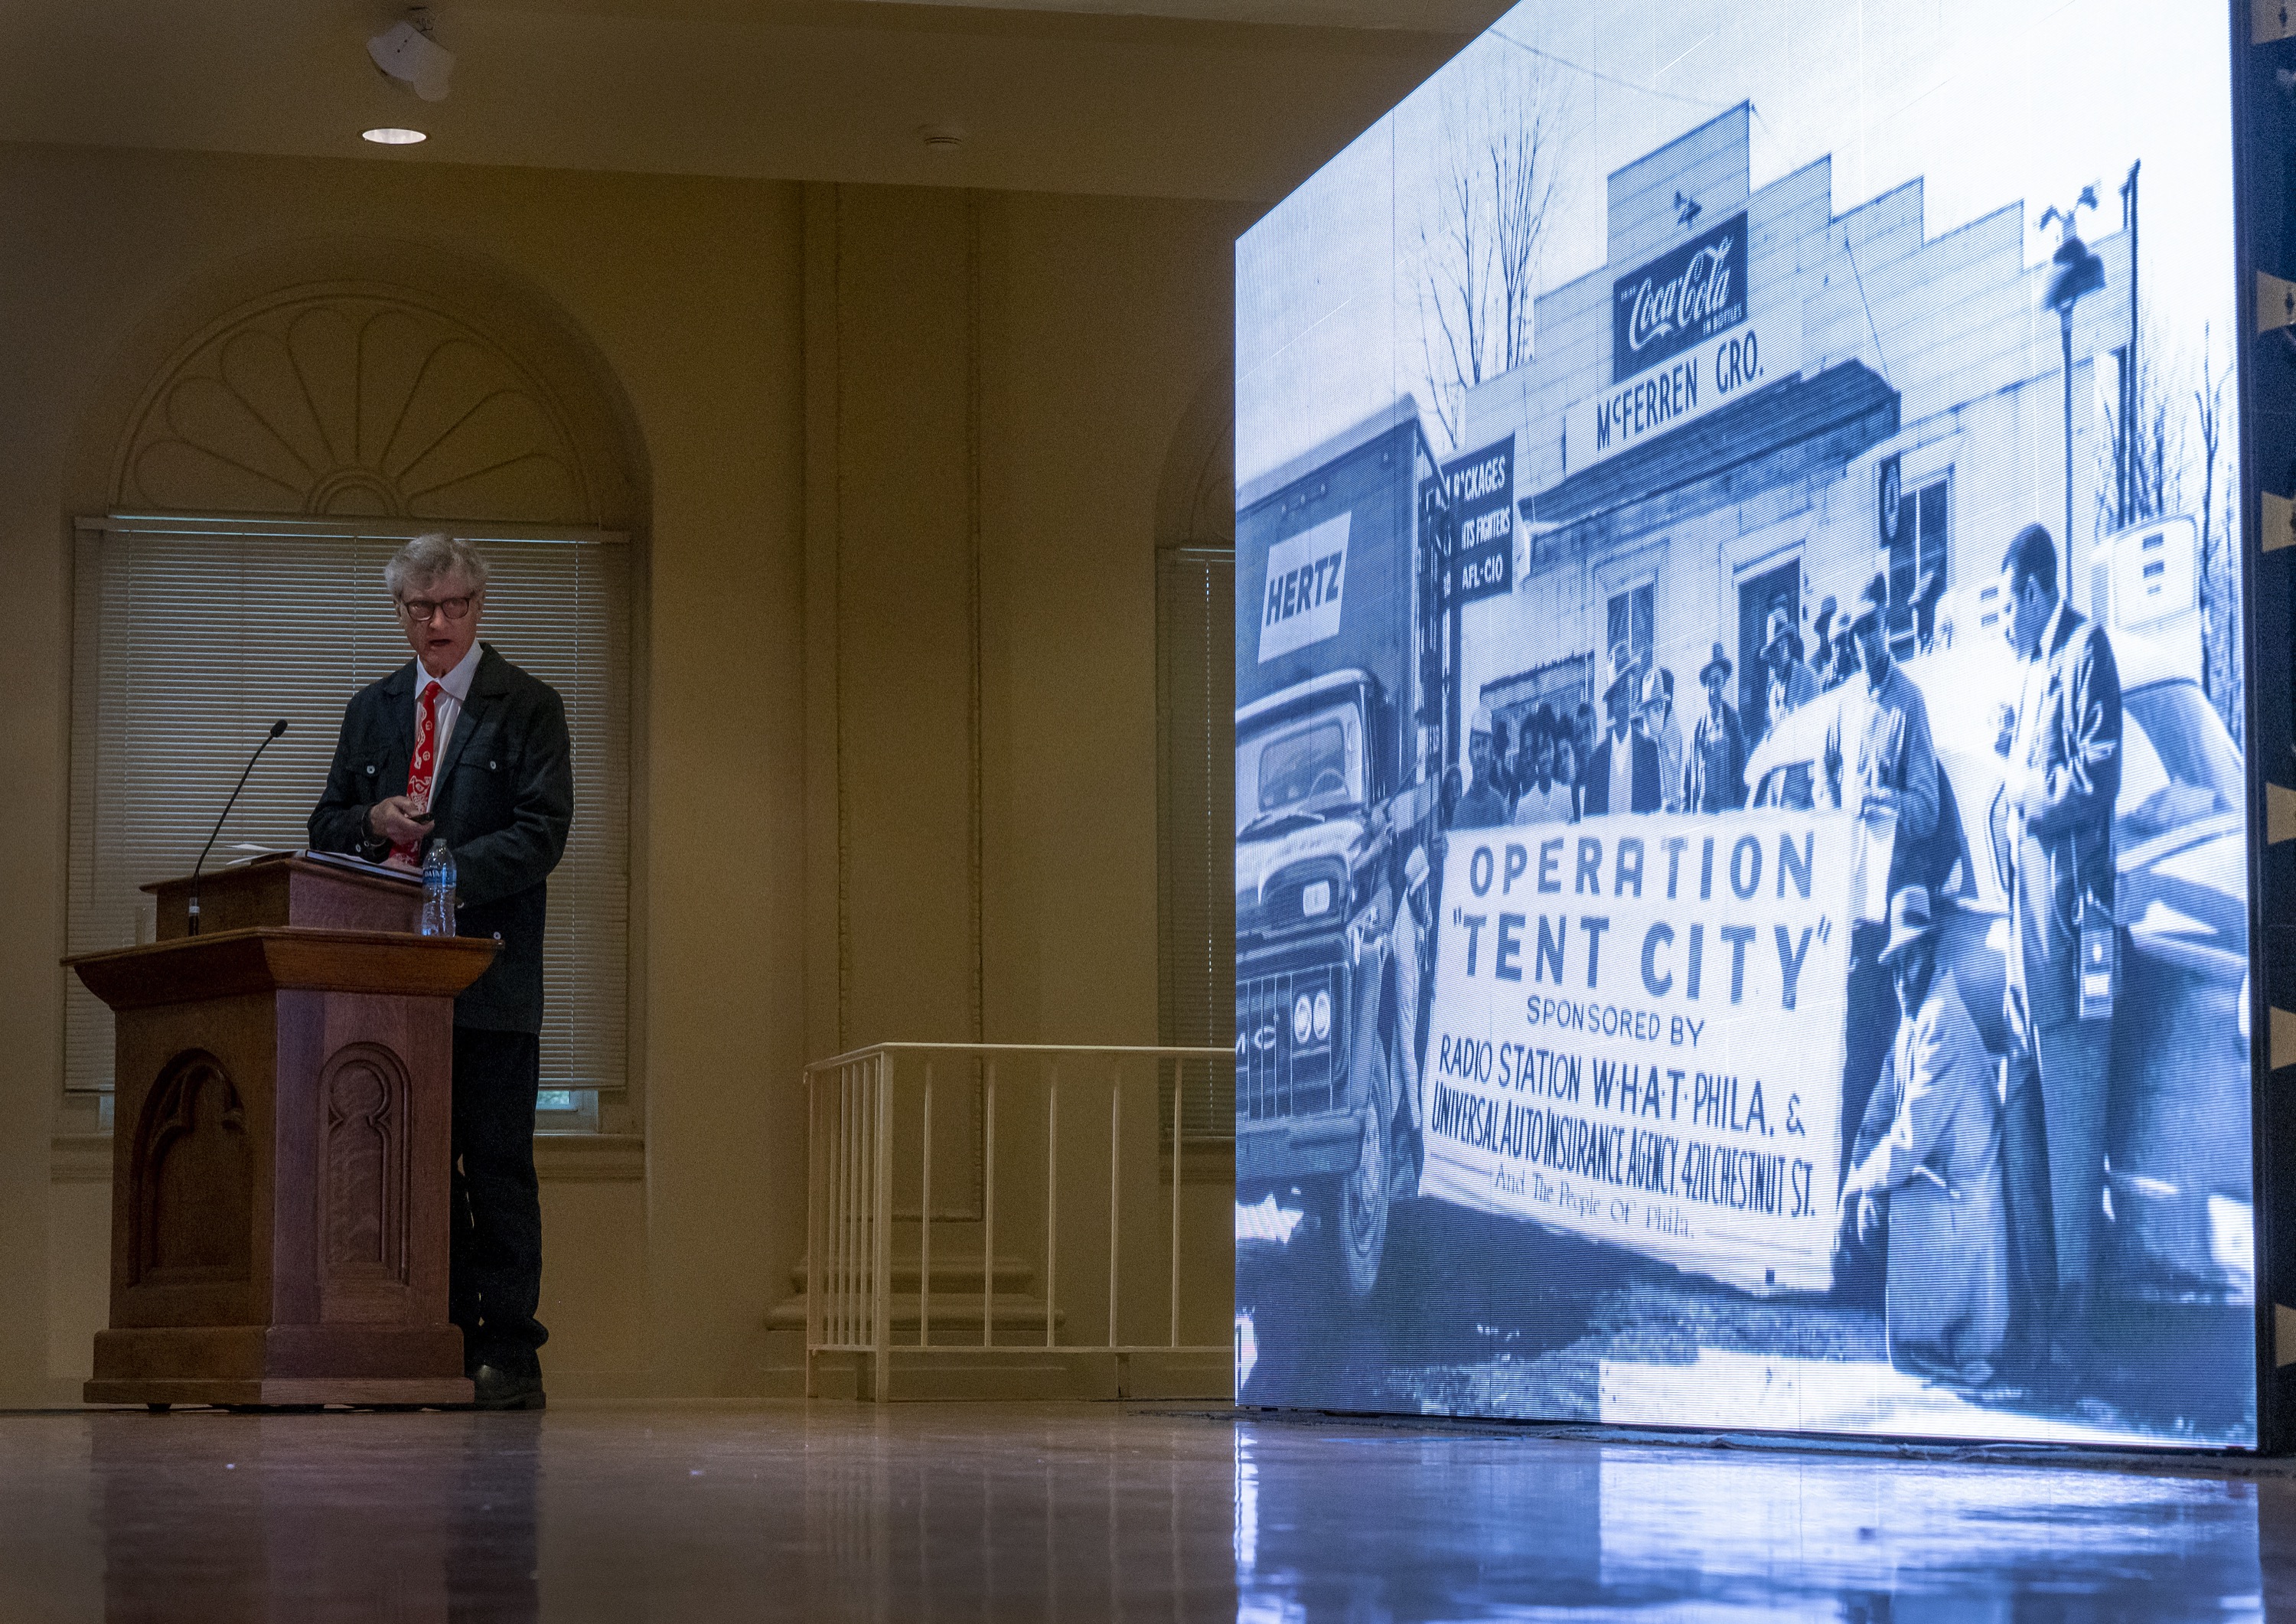 William Ferris: Photographs of civil rights movement are 'vessels of truth'